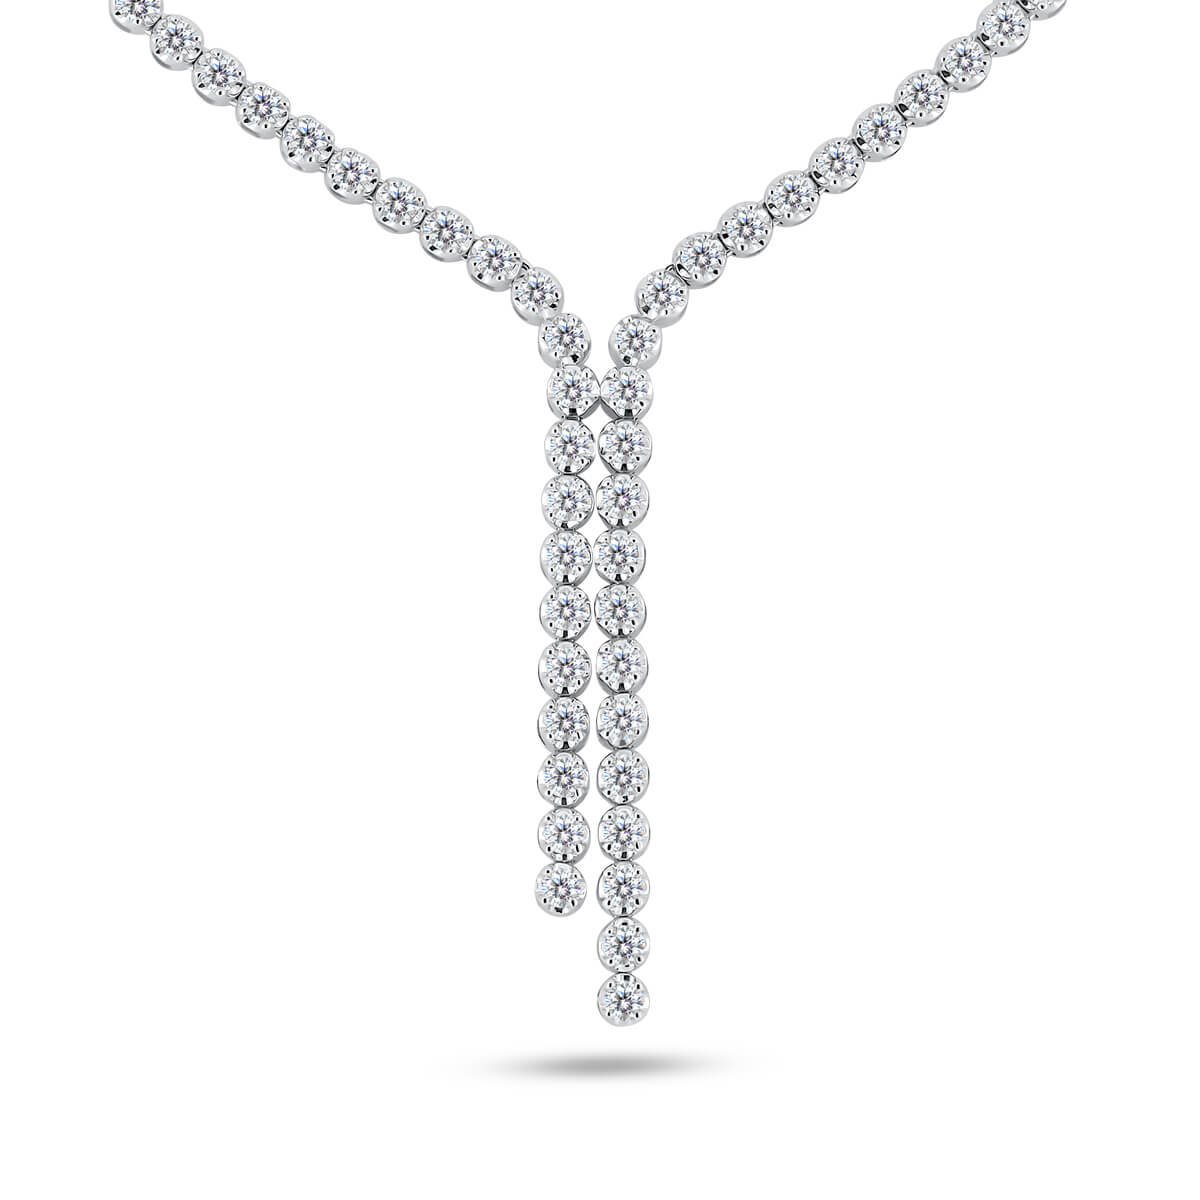 13.57 Ct Diamond Tennis Necklace, 17 Inch Lab Grown Diamond Tennis Necklace,  Beautiful White Diamond Necklace - Etsy